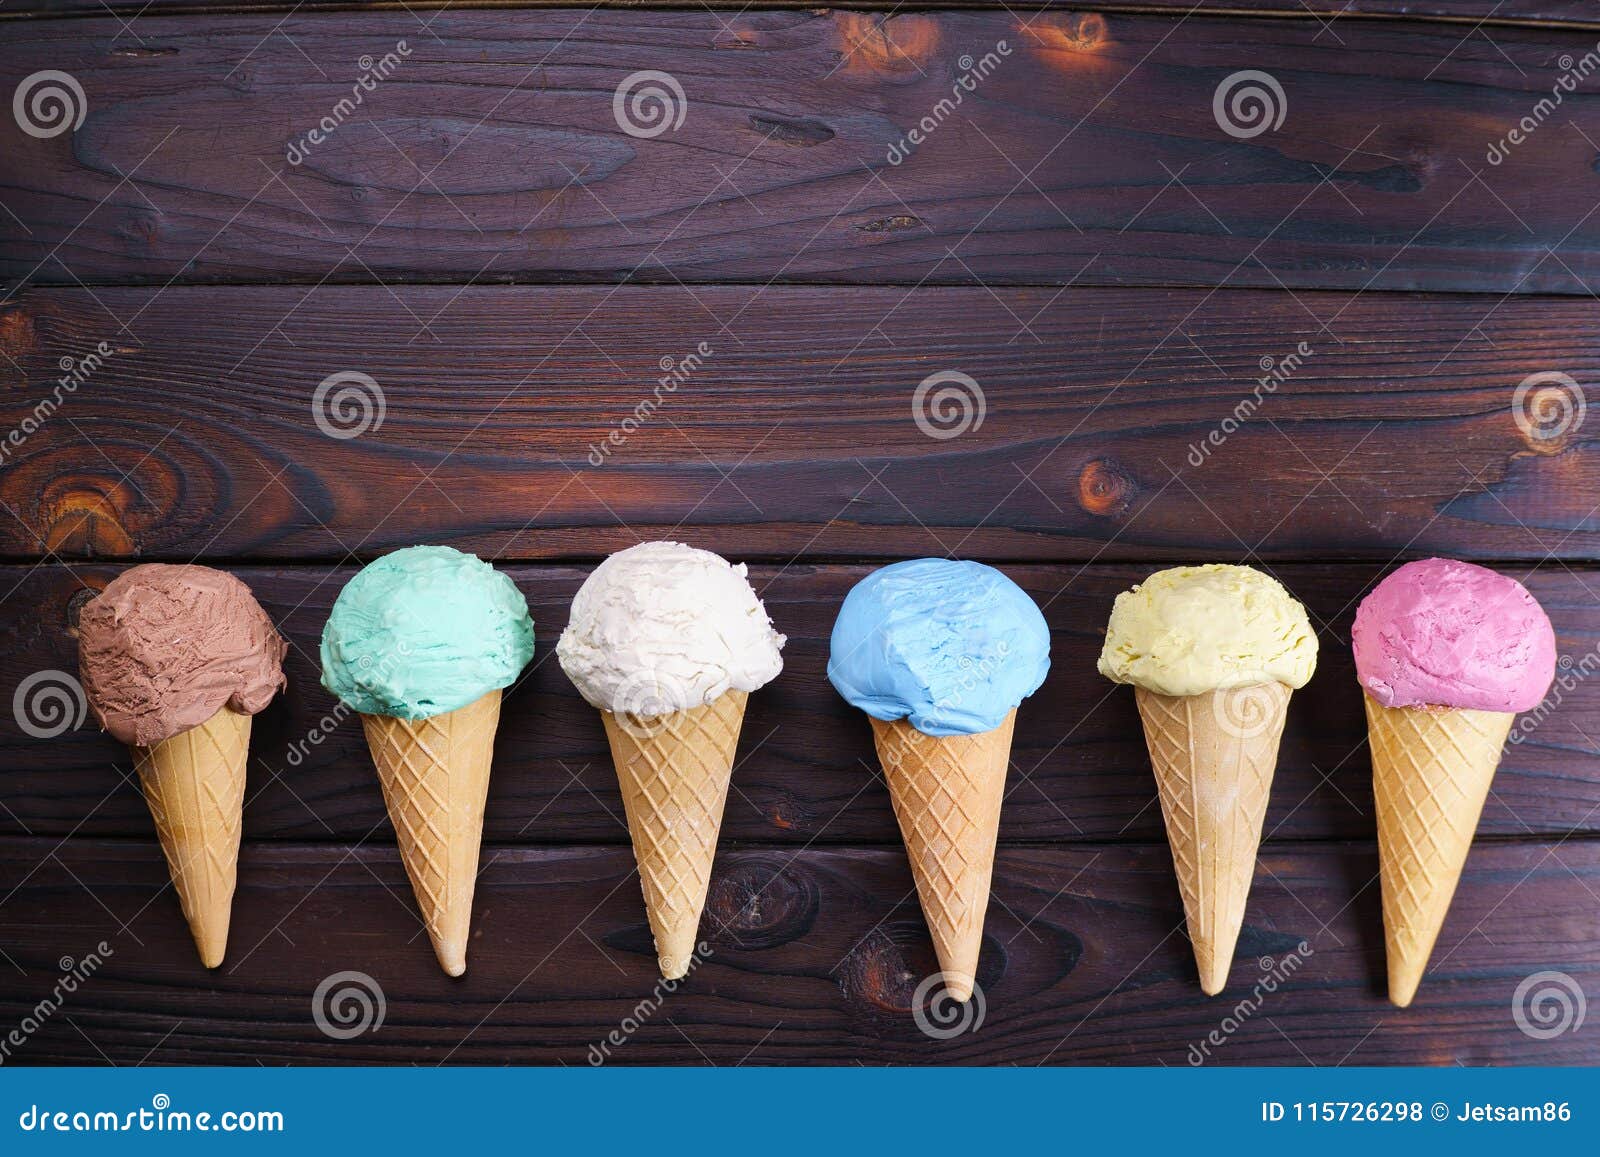 various ice cream cones on wooden table, flat lay